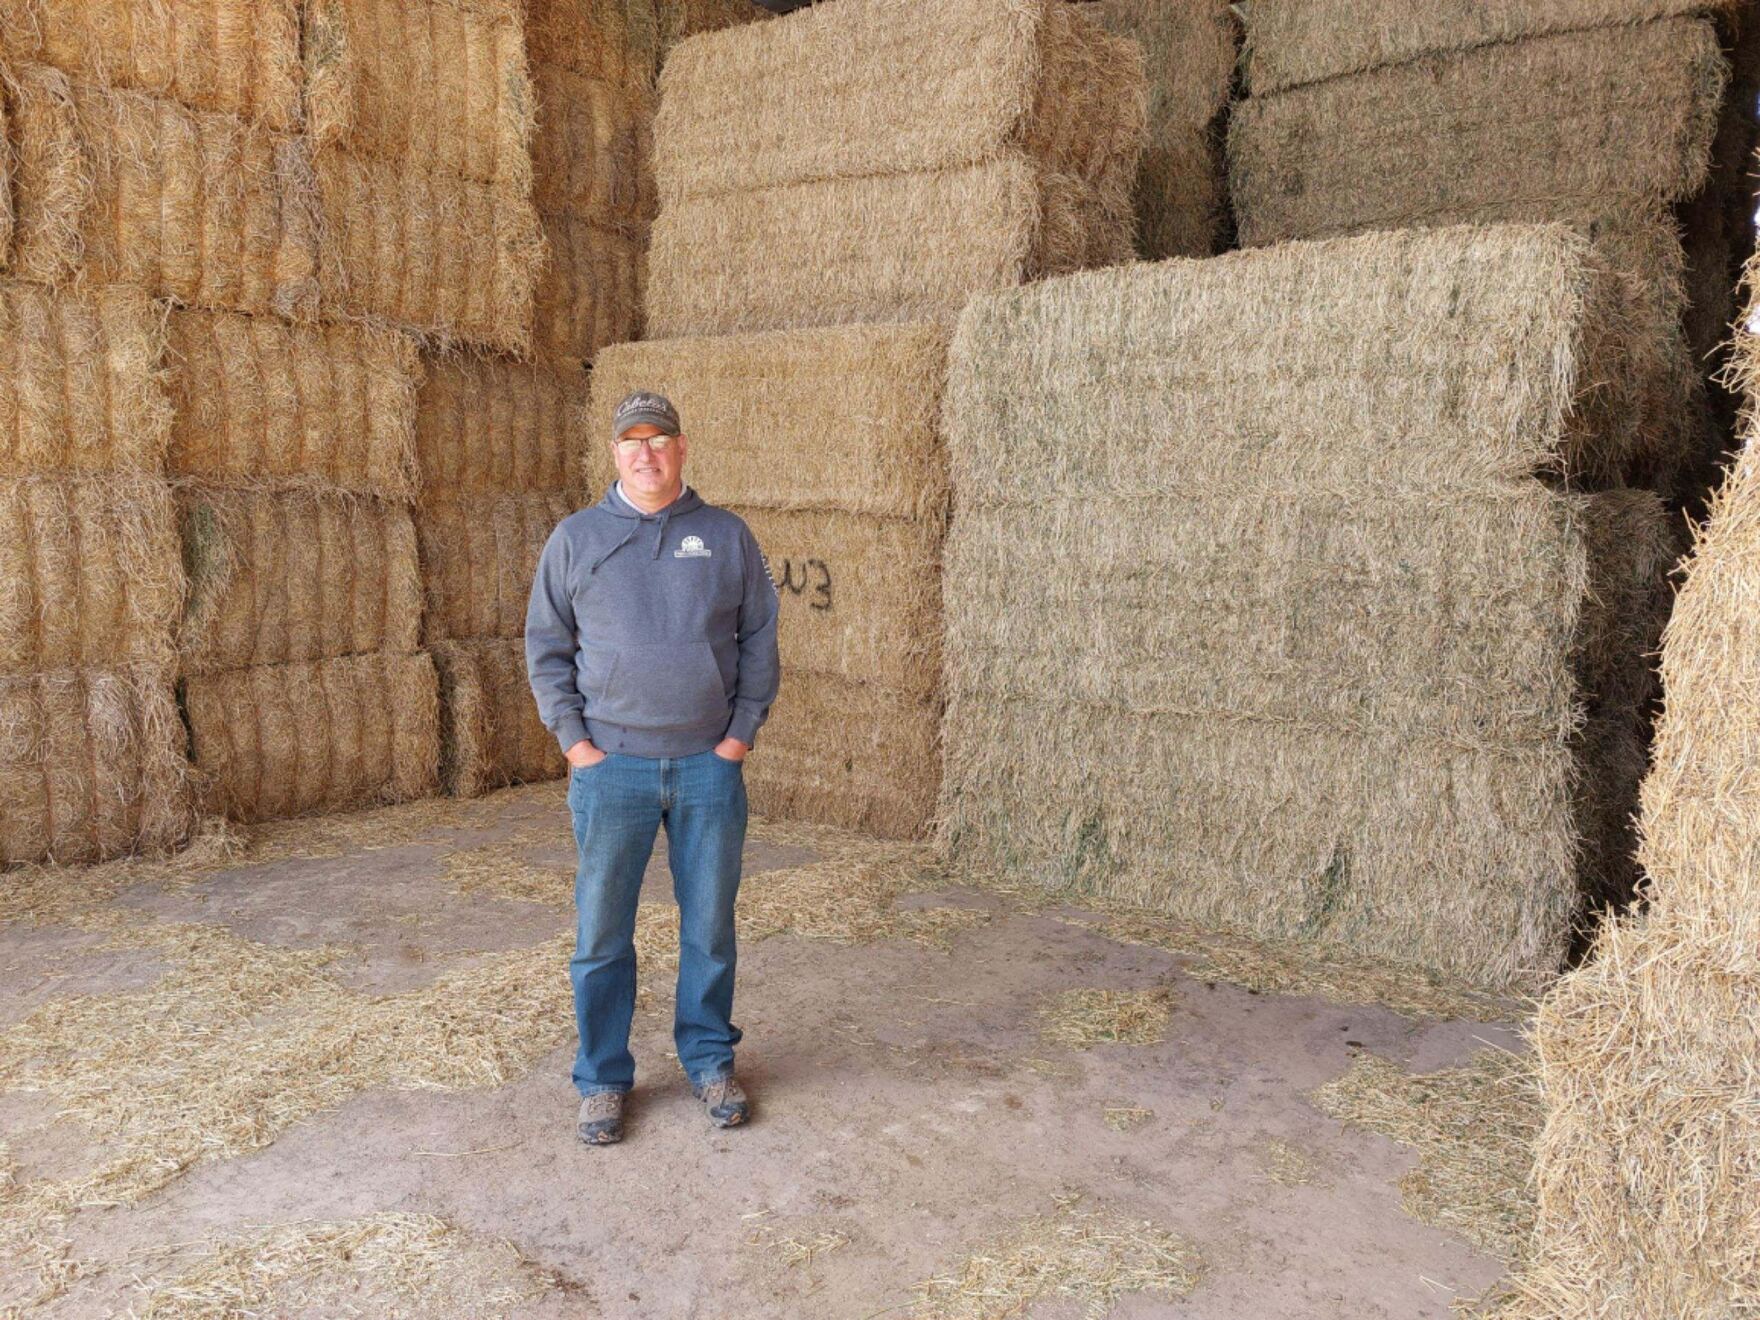 a man in a cap and sweater standing in front of bales of hay.